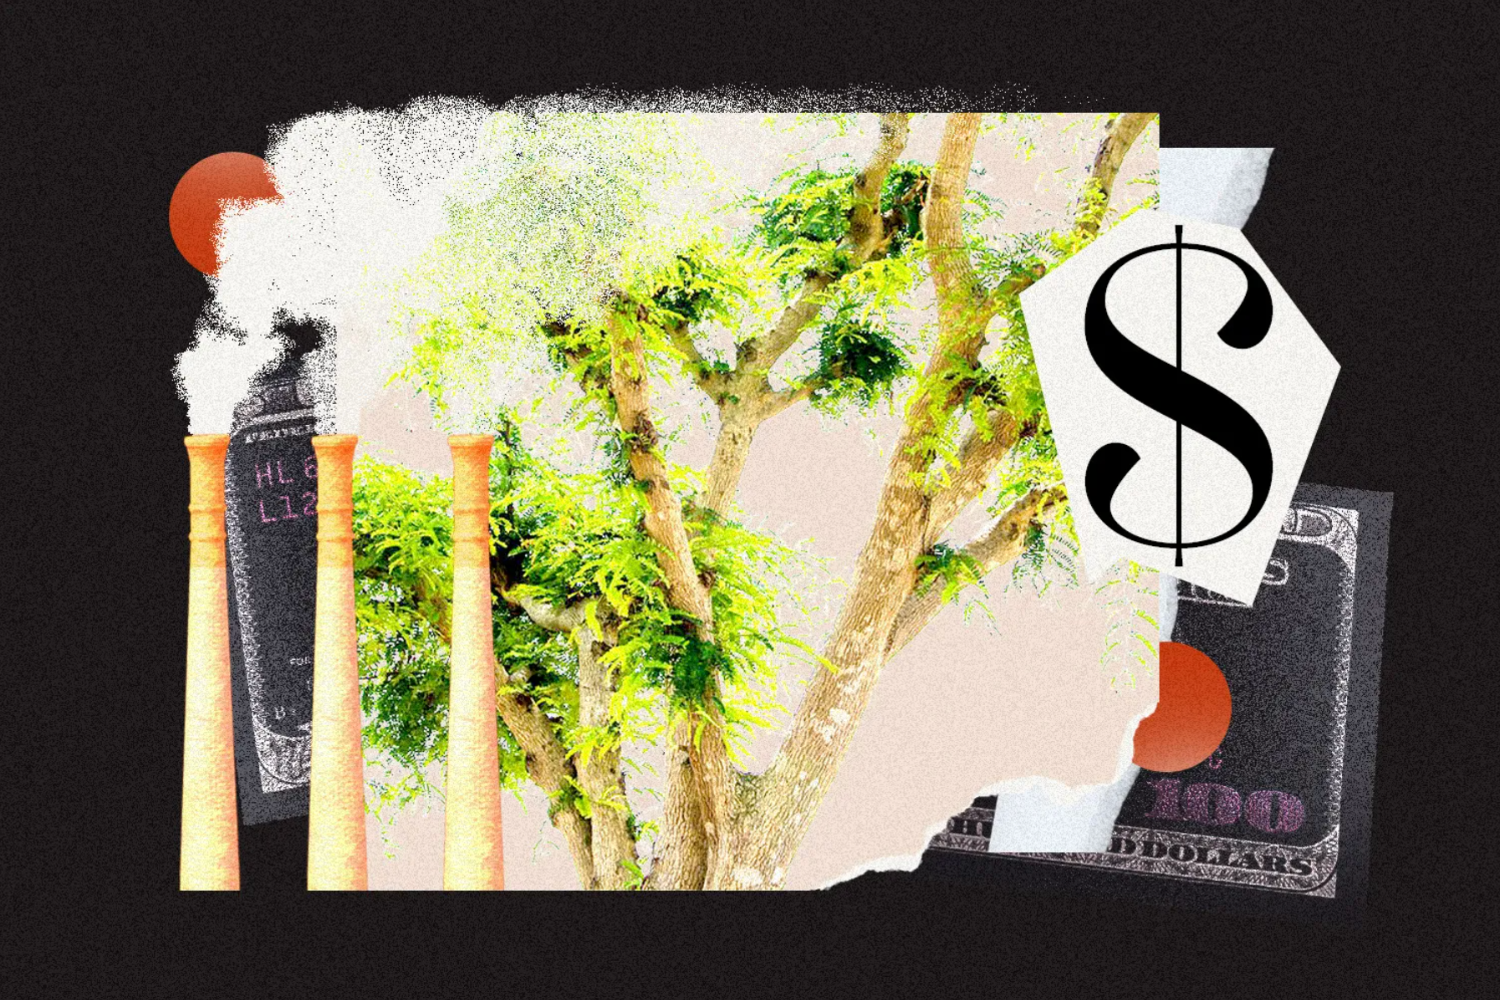 Carbon credits with smokestacks, trees, money, dollar signs, and big corporations